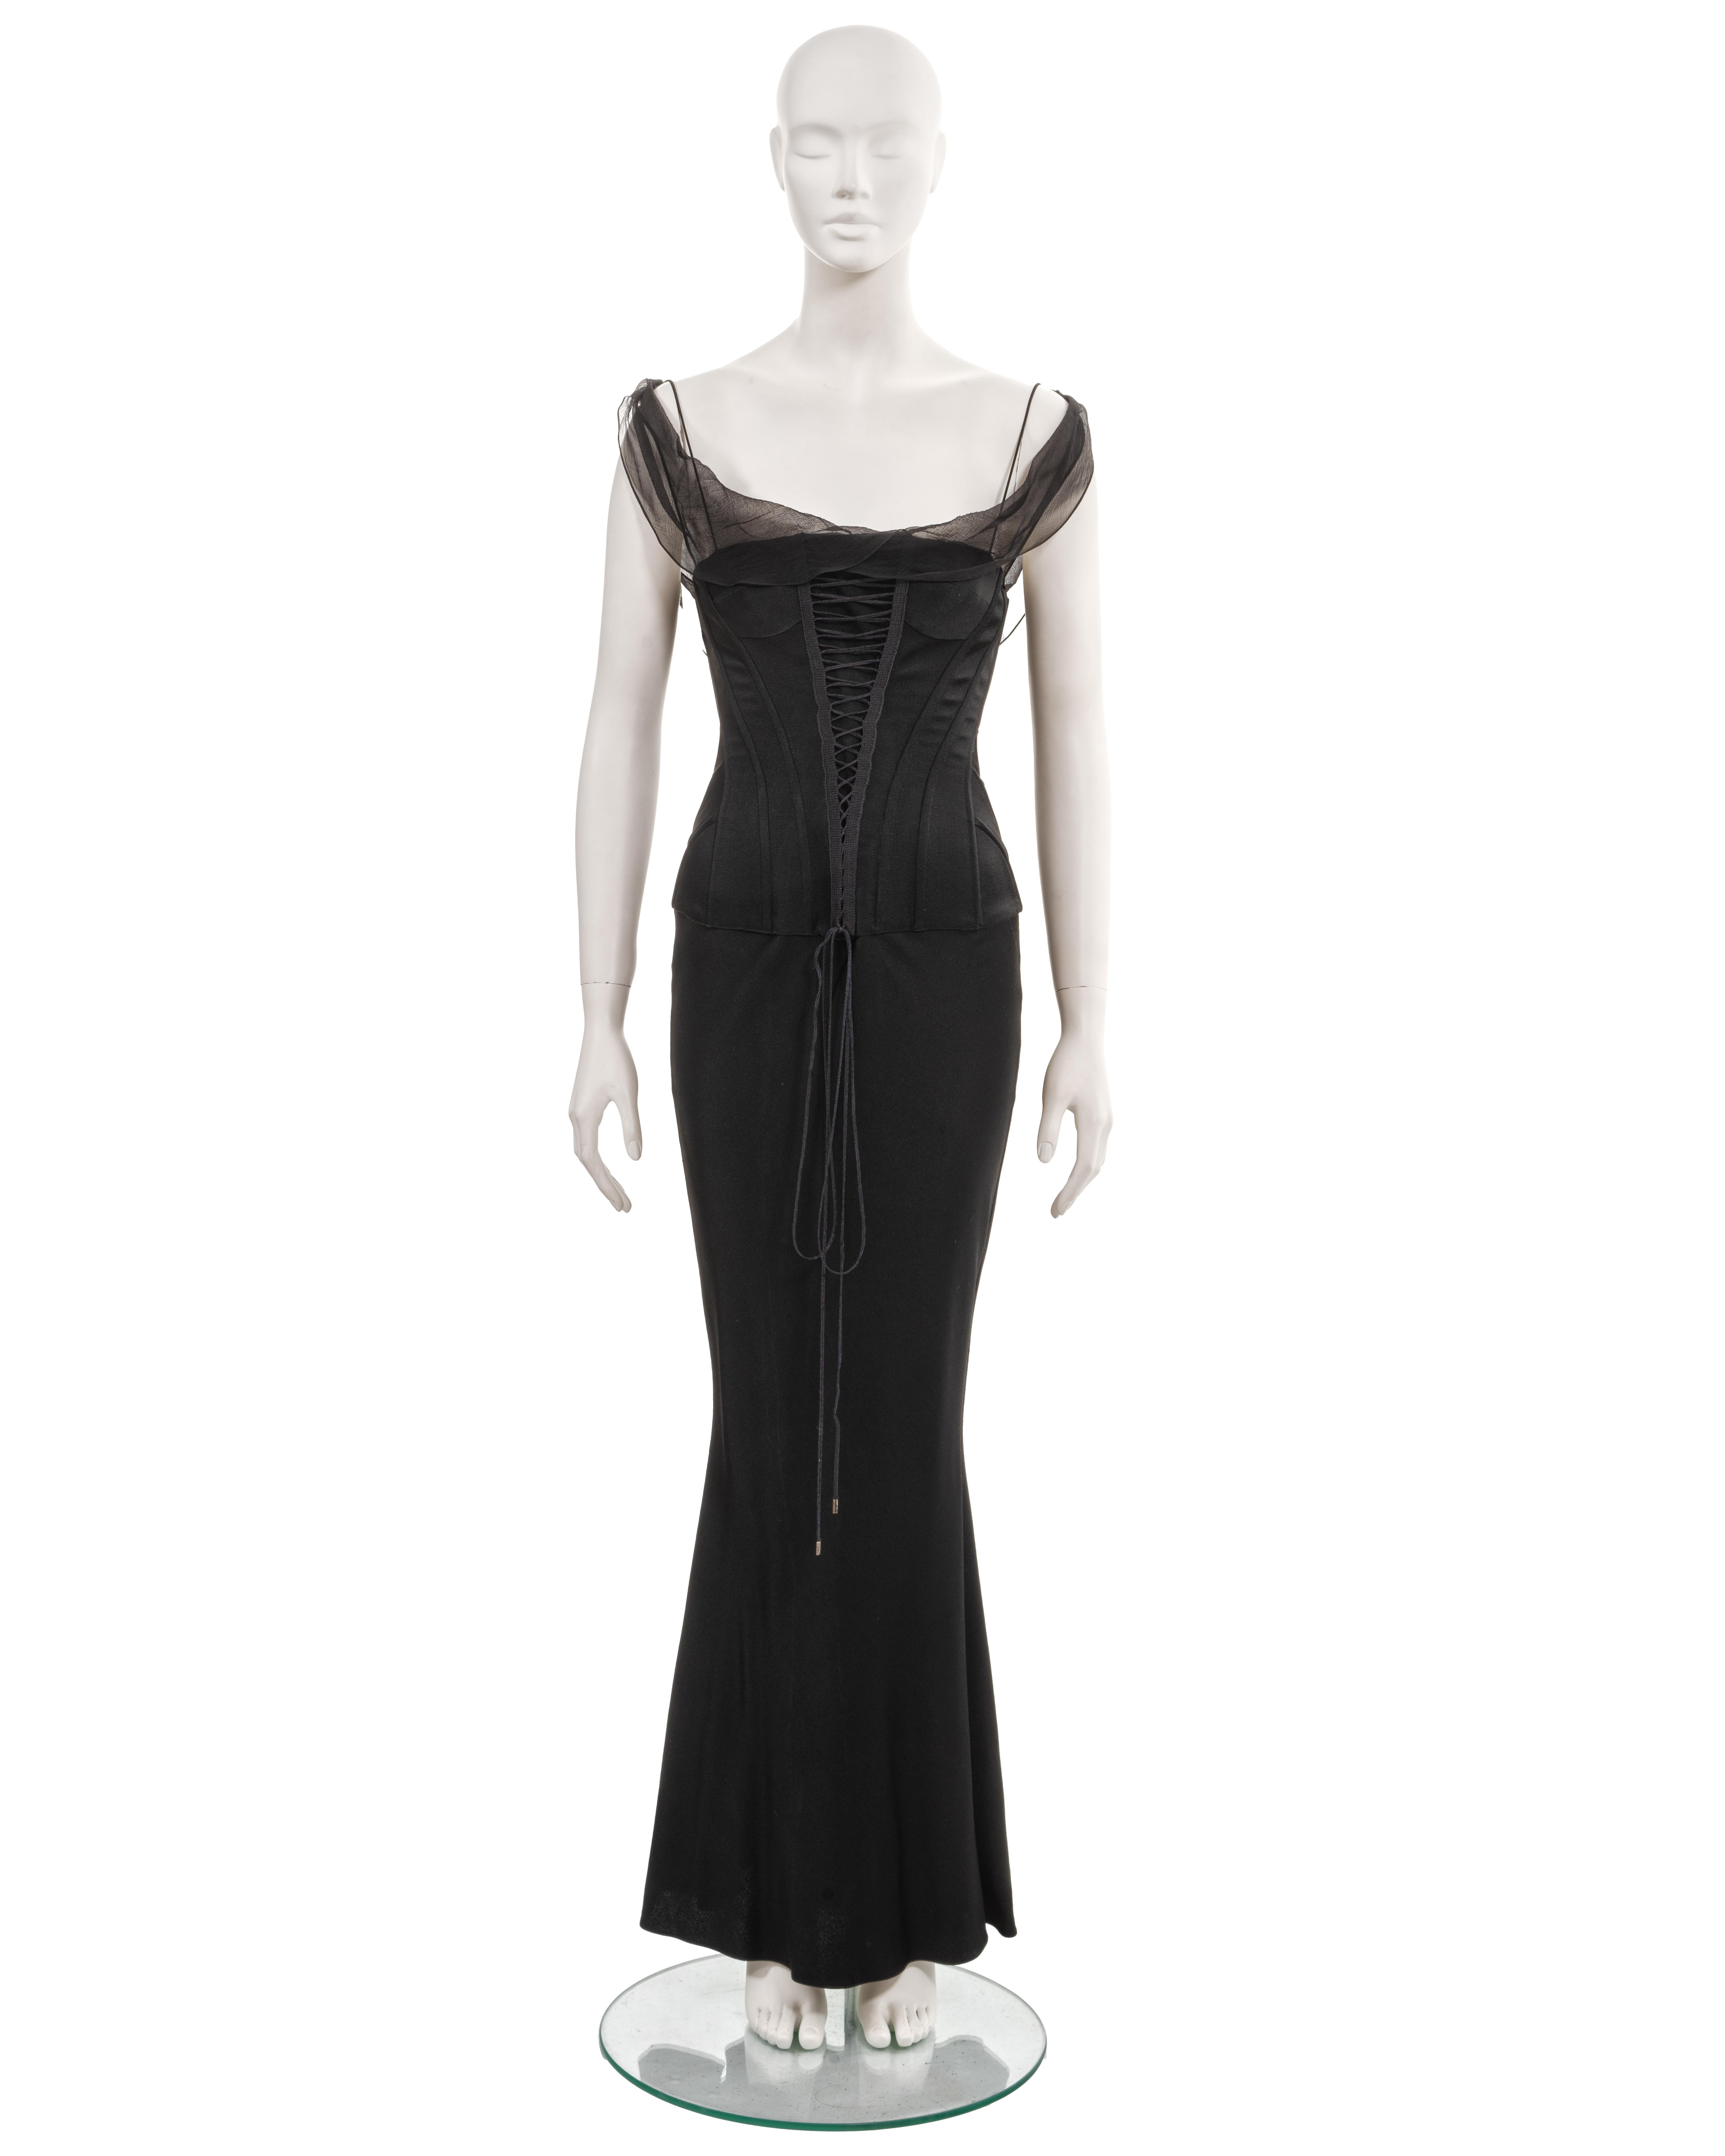 ▪ John Galliano evening dress
▪ Spring-Summer 2003
▪ Sold by One of a Kind Archive
▪ Black bias-cut crepe-backed-satin 
▪ Integrated corset with lace-up fastenings at the front and back
▪ Silk chiffon cowl neck and off-shoulder straps
▪ Floor-length